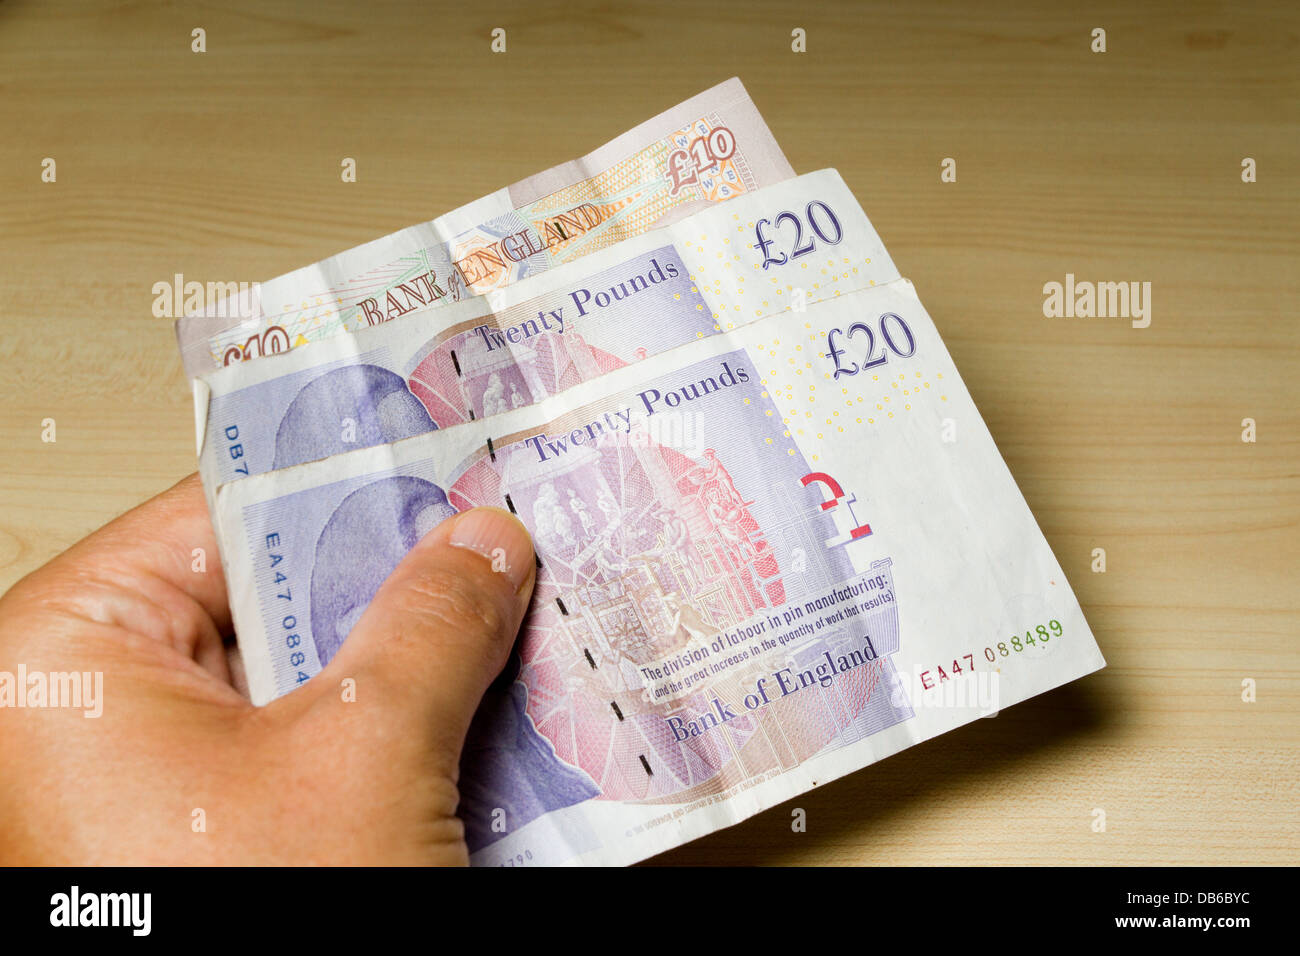 A mans hand hold £50 sterling in cash, consisting of 2 £20 and 1 £10 pound notes, England, UK Stock Photo